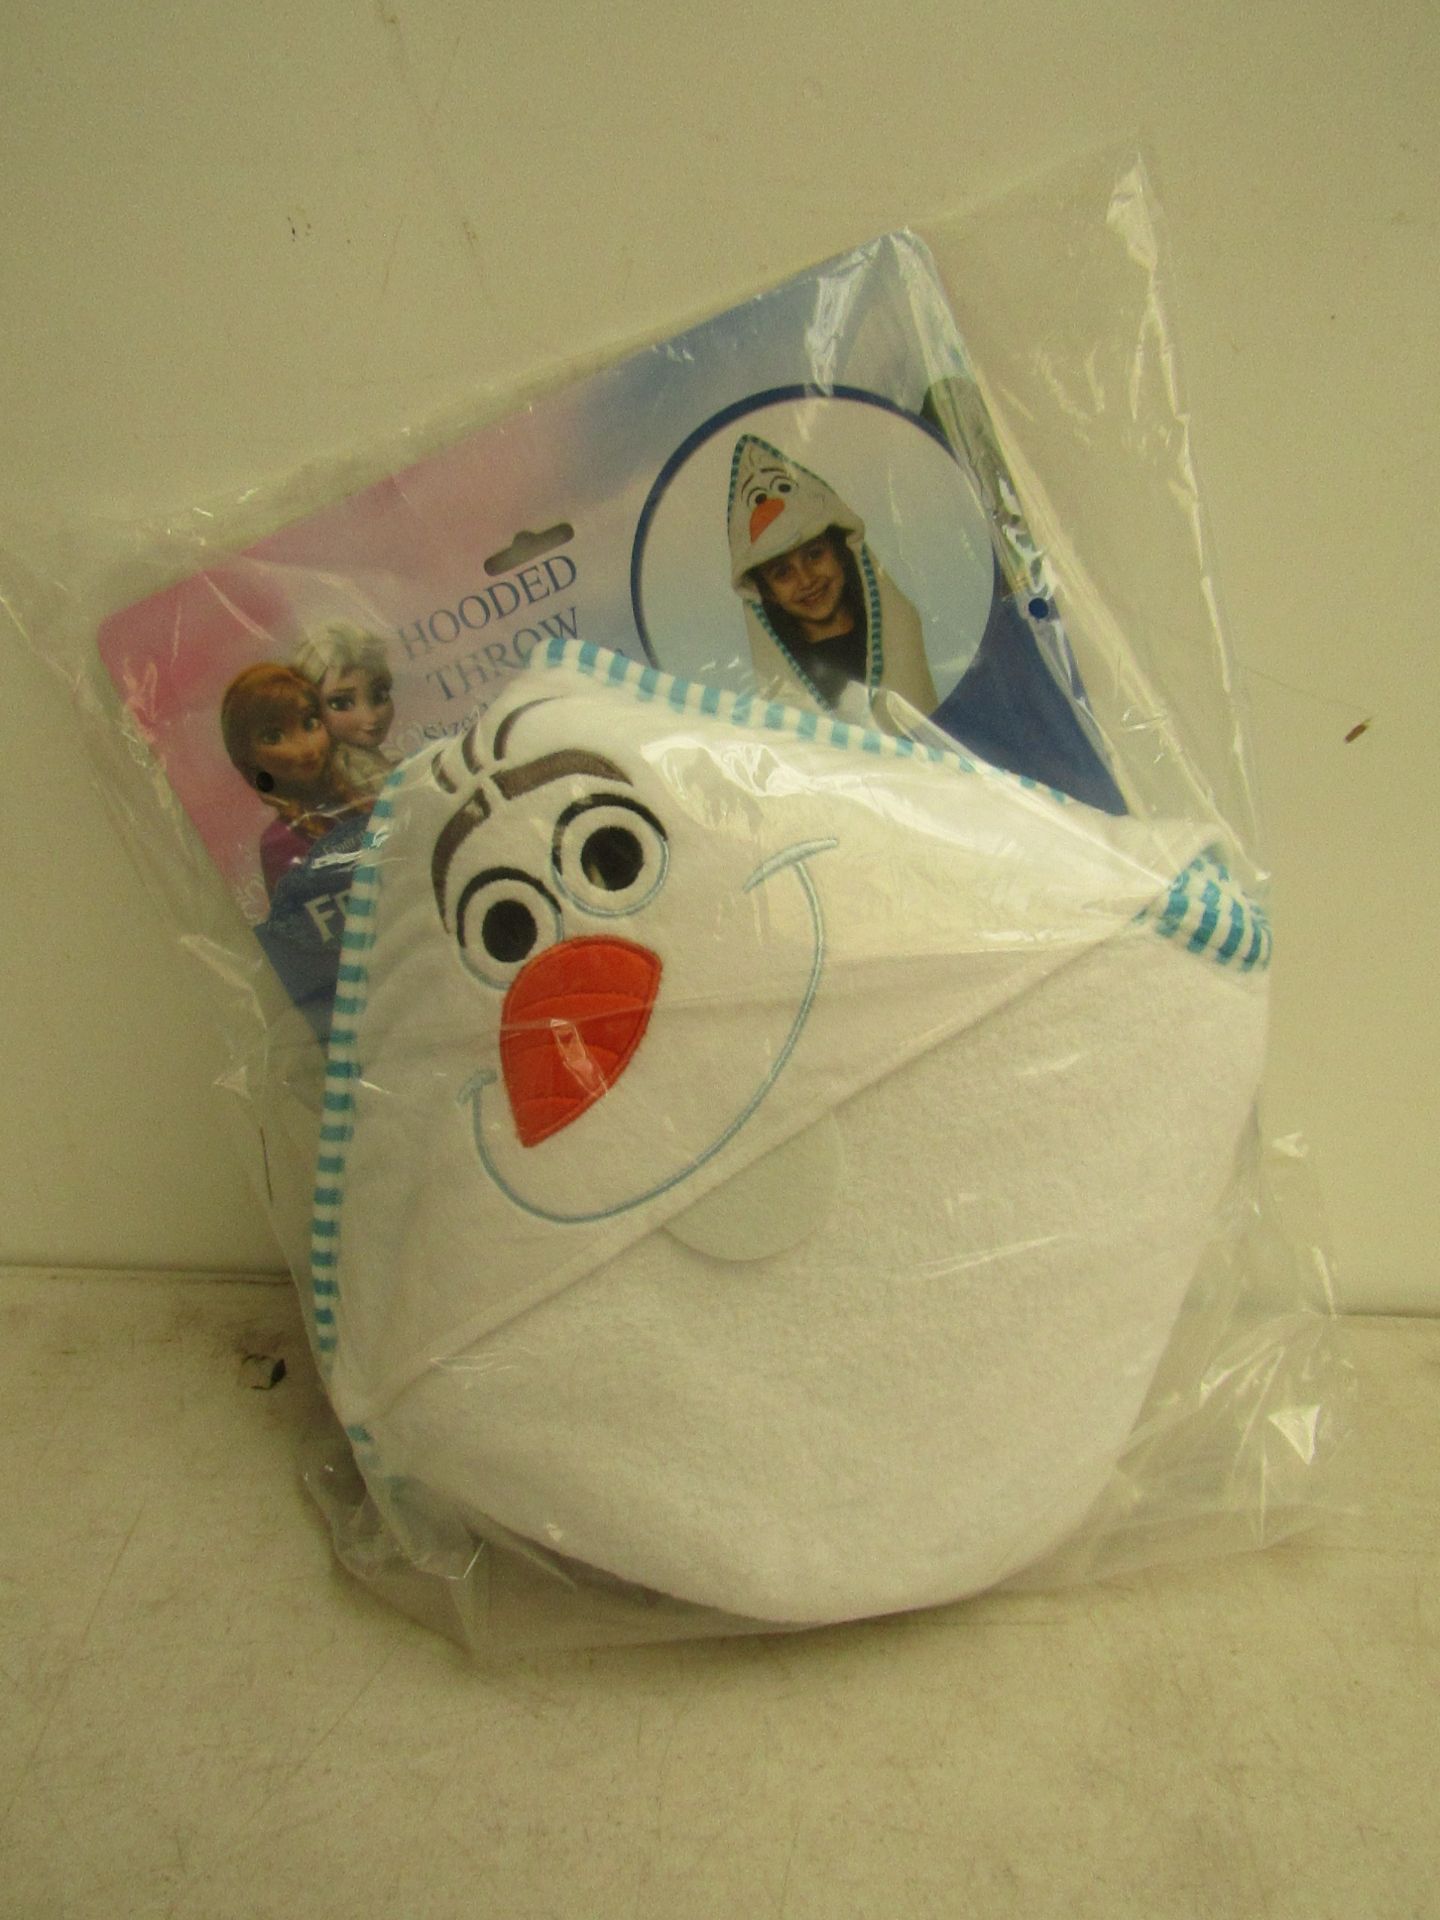 2x Disney Frozen Olaf hooded throws, all new and in packaging.